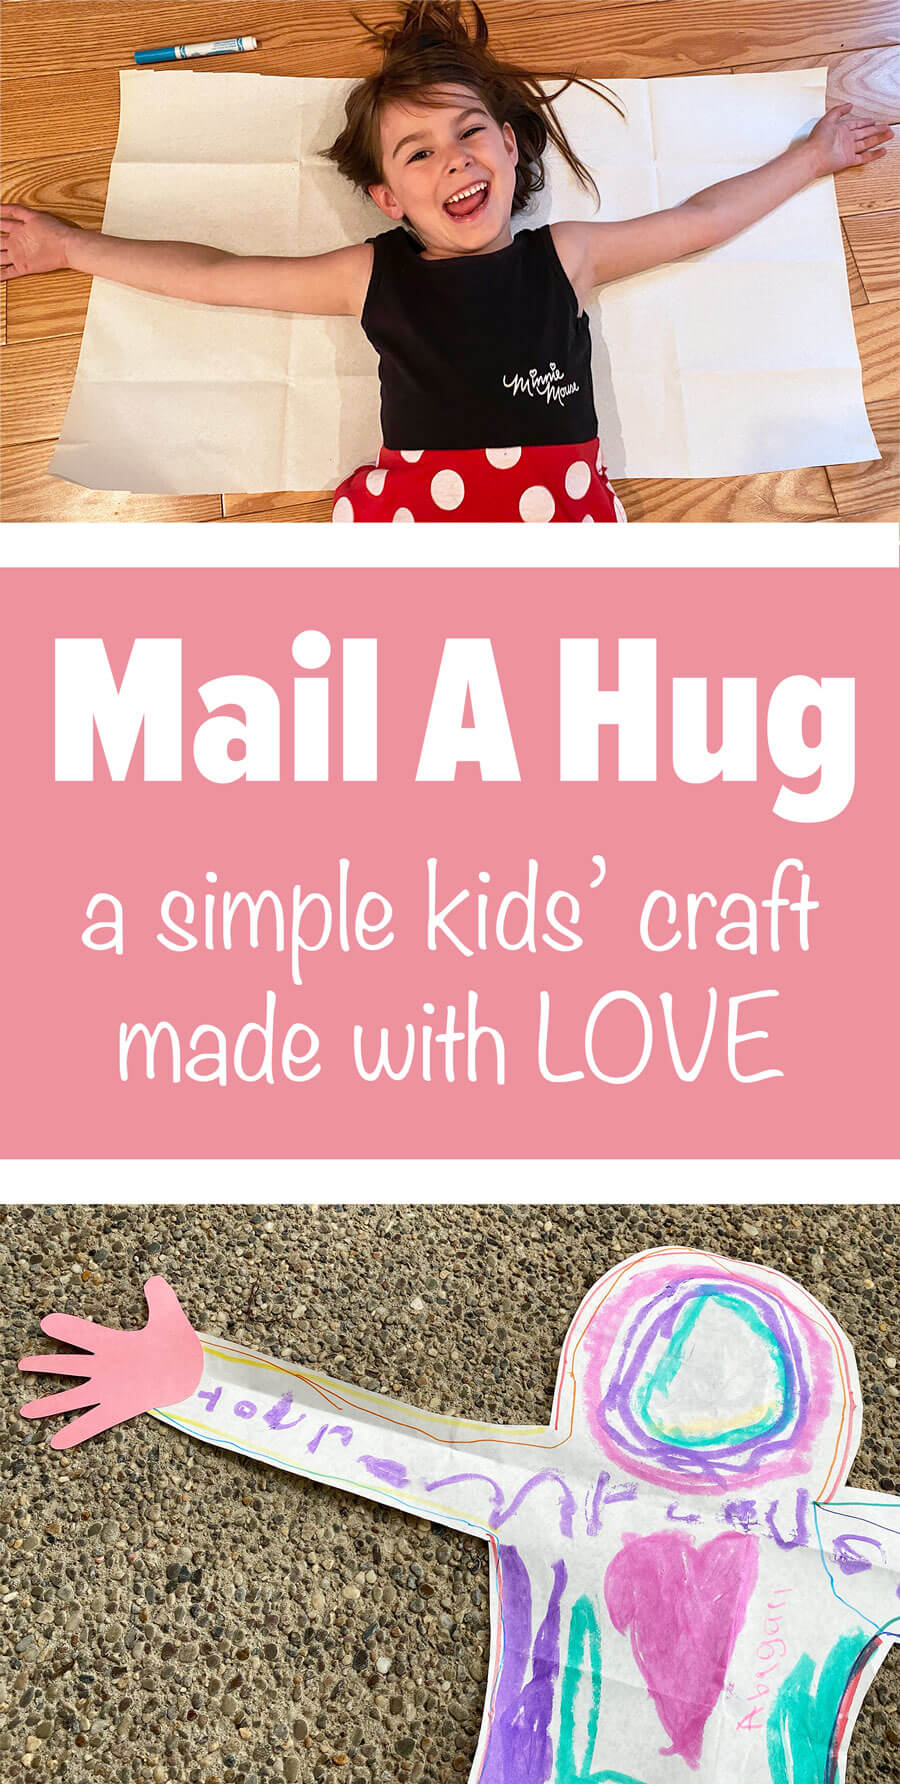 Brighten someone's day! Send a hug from your child. This simple family-friendly craft is perfect for quarantine, grandparents day, deployed parents and more! Get inspired and learn how to create your own from our blog. #diycraft #familyfriendly #shareahug #makeahug #mailahug